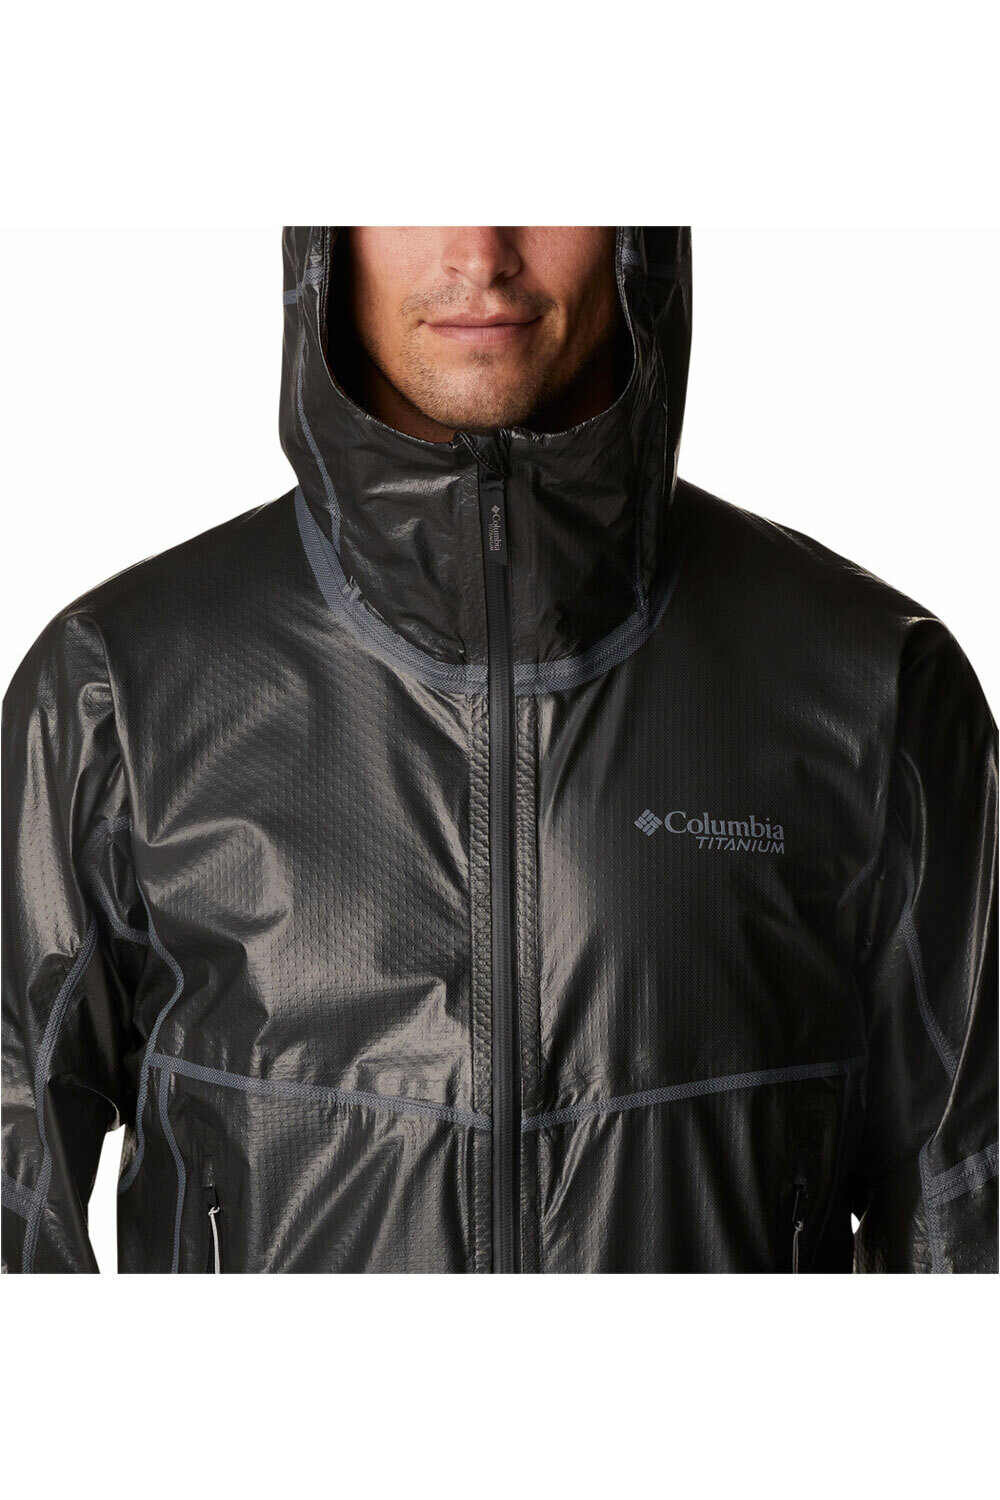 Columbia CHAQUETA TRAIL RUNNING HOMBRE OutDry Extreme Mesh Hooded Shell vista trasera